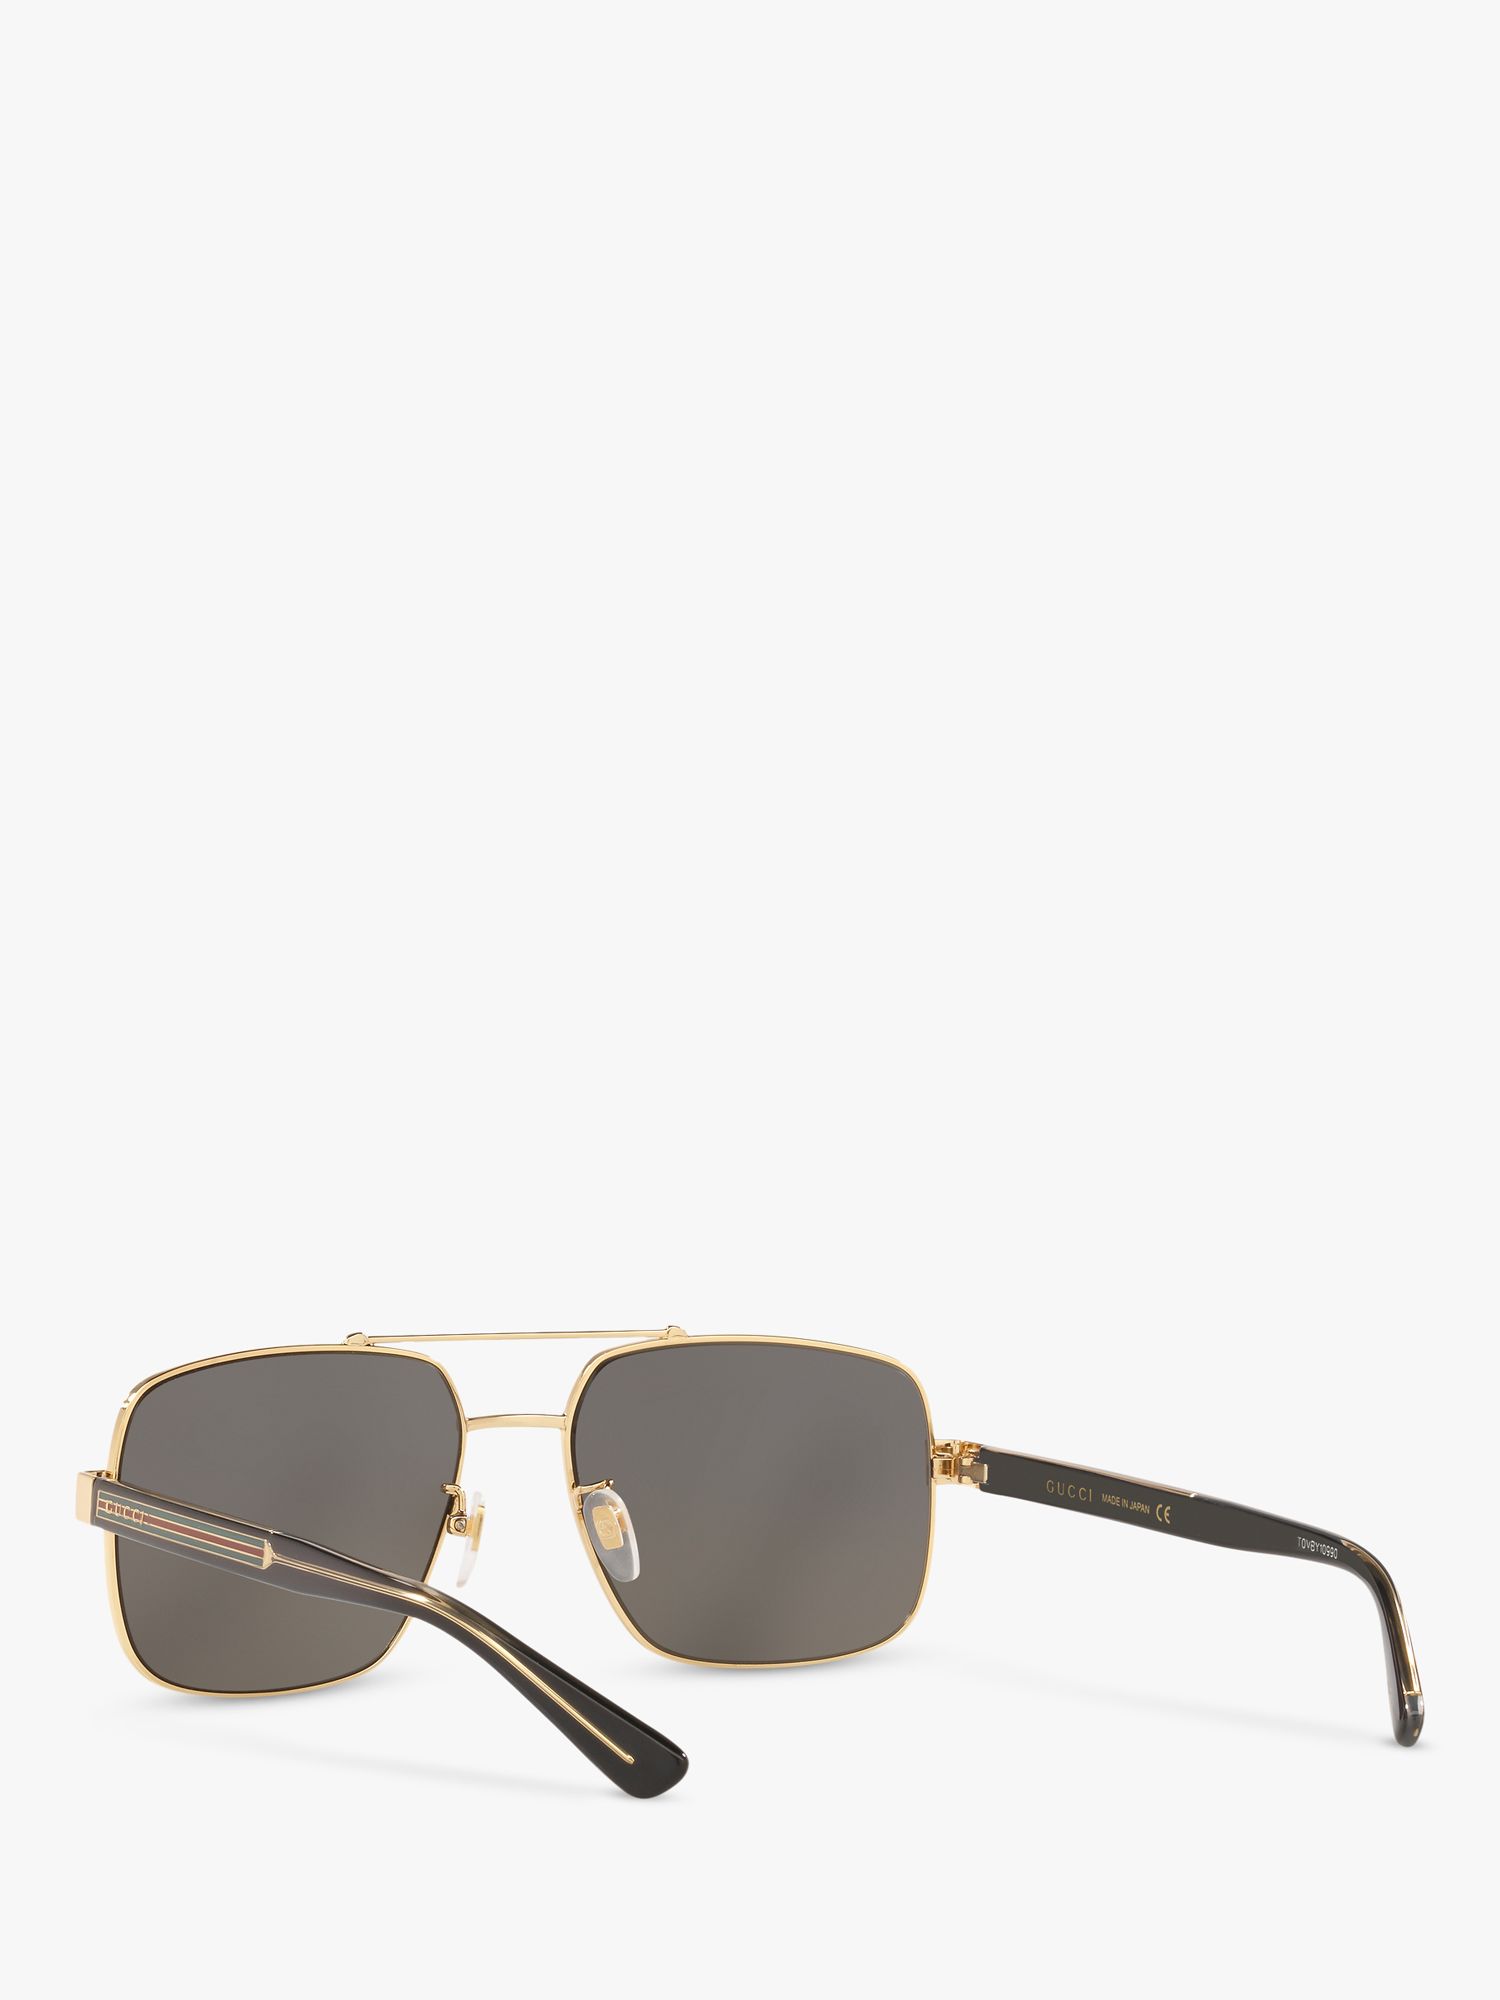 Buy Gucci GG0529S Men's Square Sunglasses, Gold/Grey Online at johnlewis.com